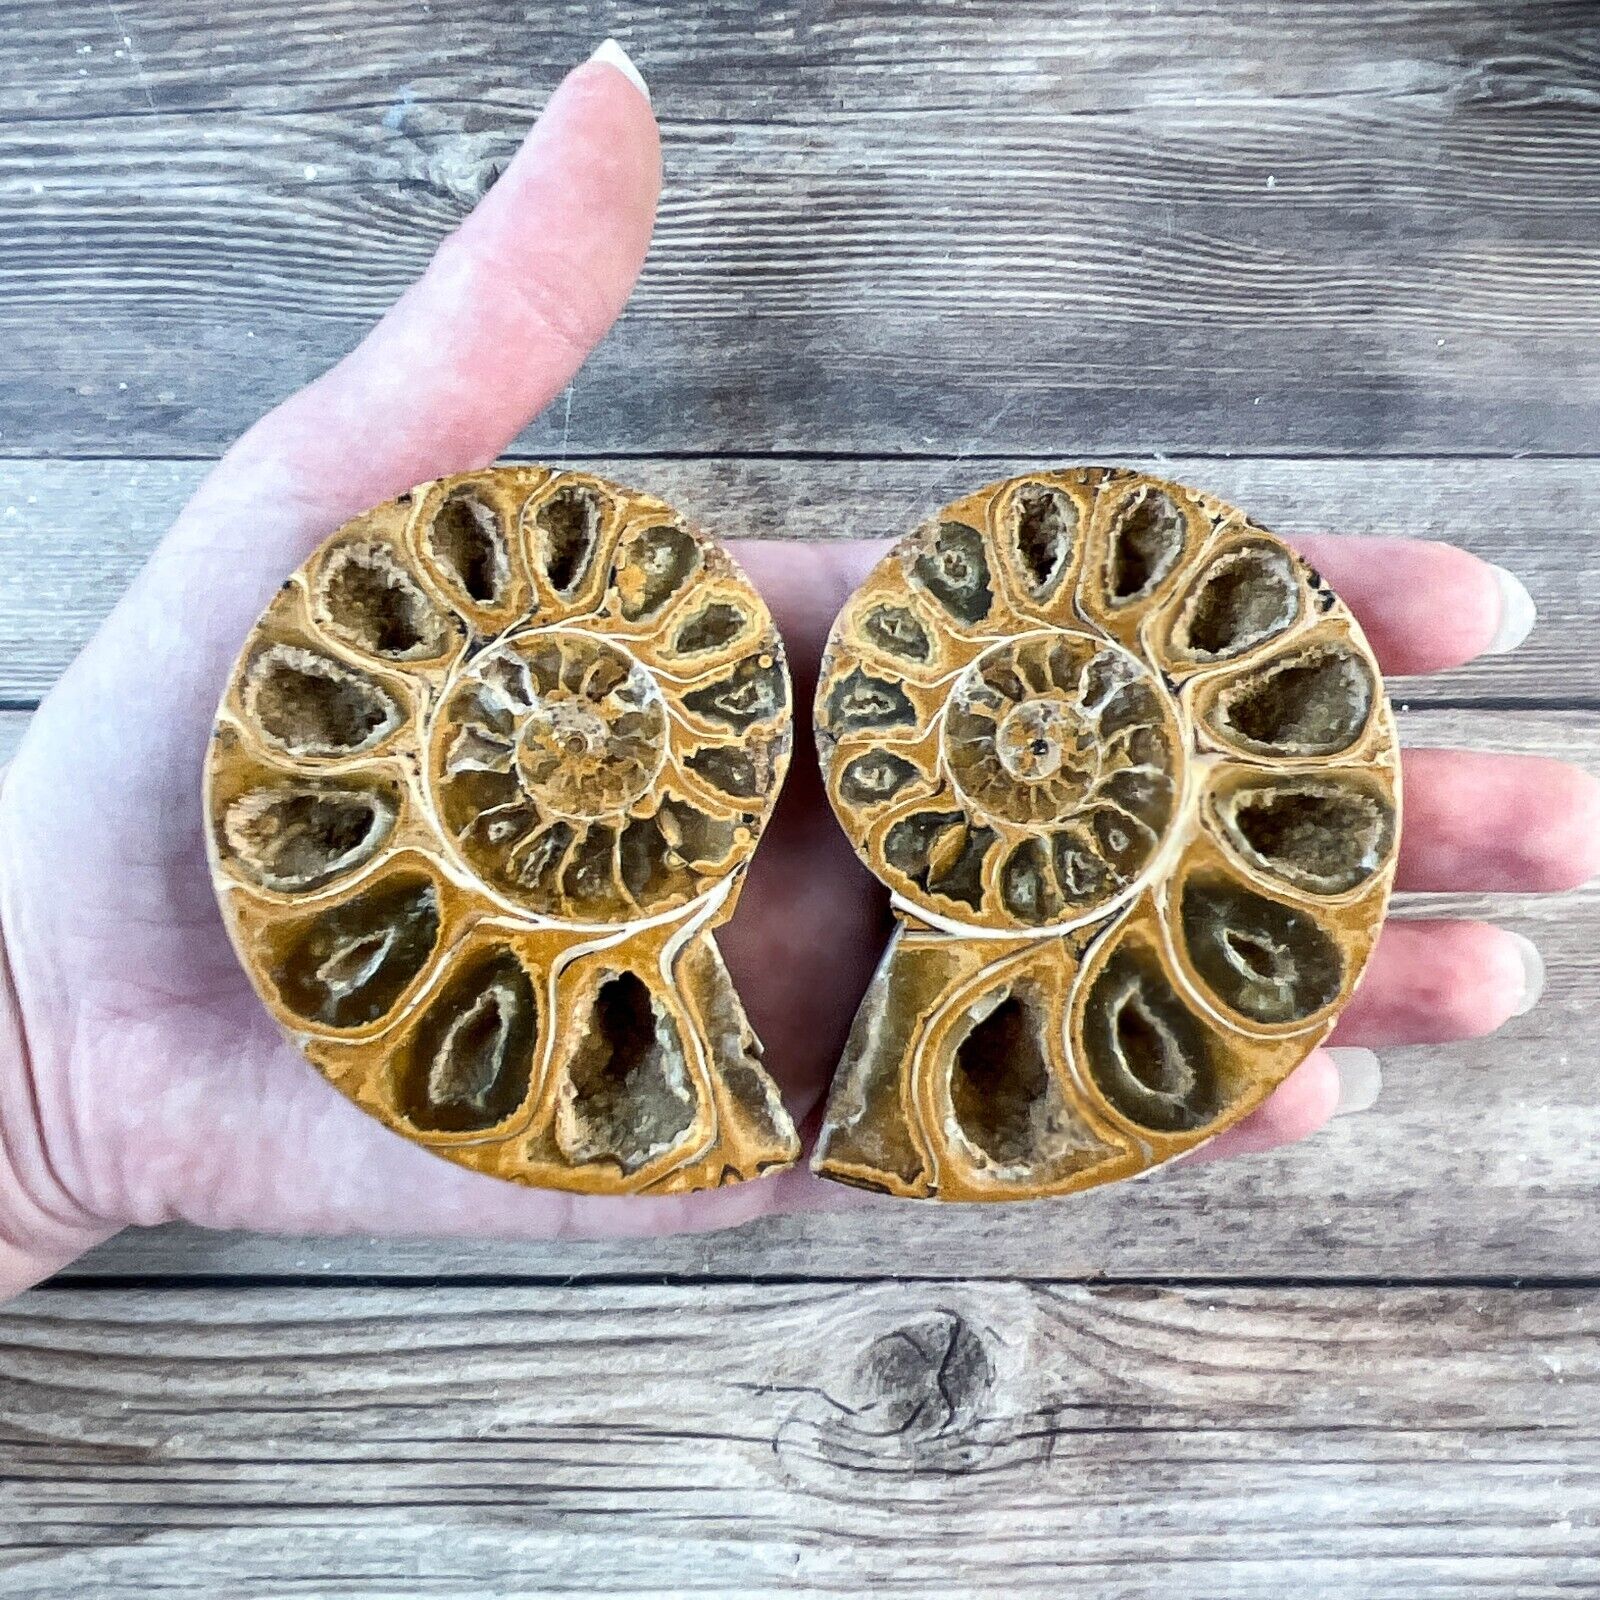 Ammonite Fossil Pair with Calcite Chambers 146g, Polished